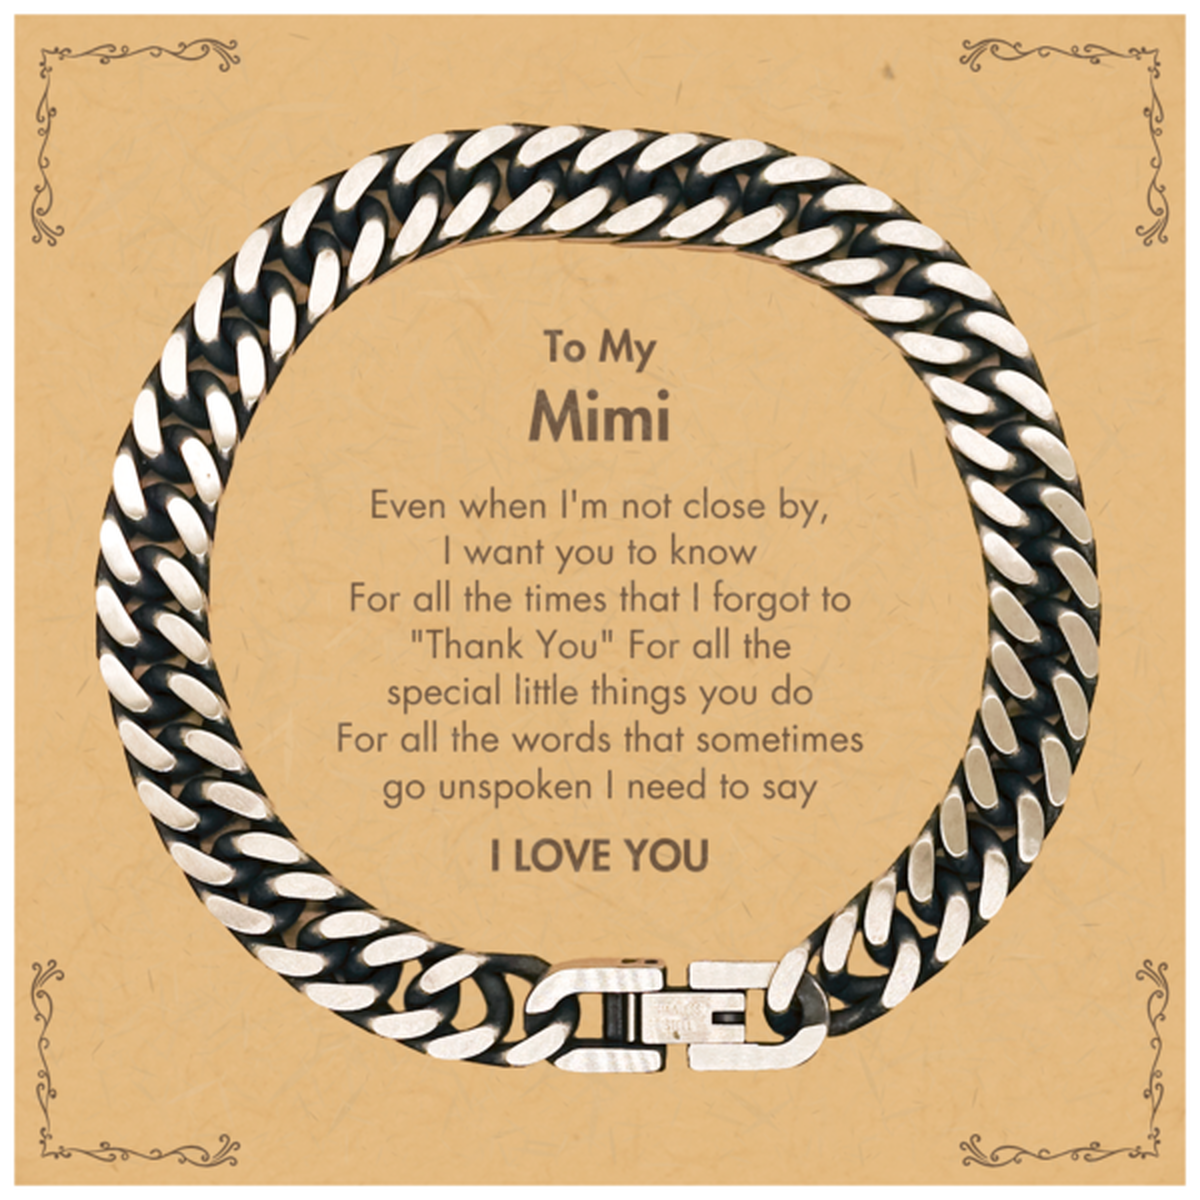 Thank You Gifts for Mimi, Keepsake Cuban Link Chain Bracelet Gifts for Mimi Birthday Mother's day Father's Day Mimi For all the words That sometimes go unspoken I need to say I LOVE YOU